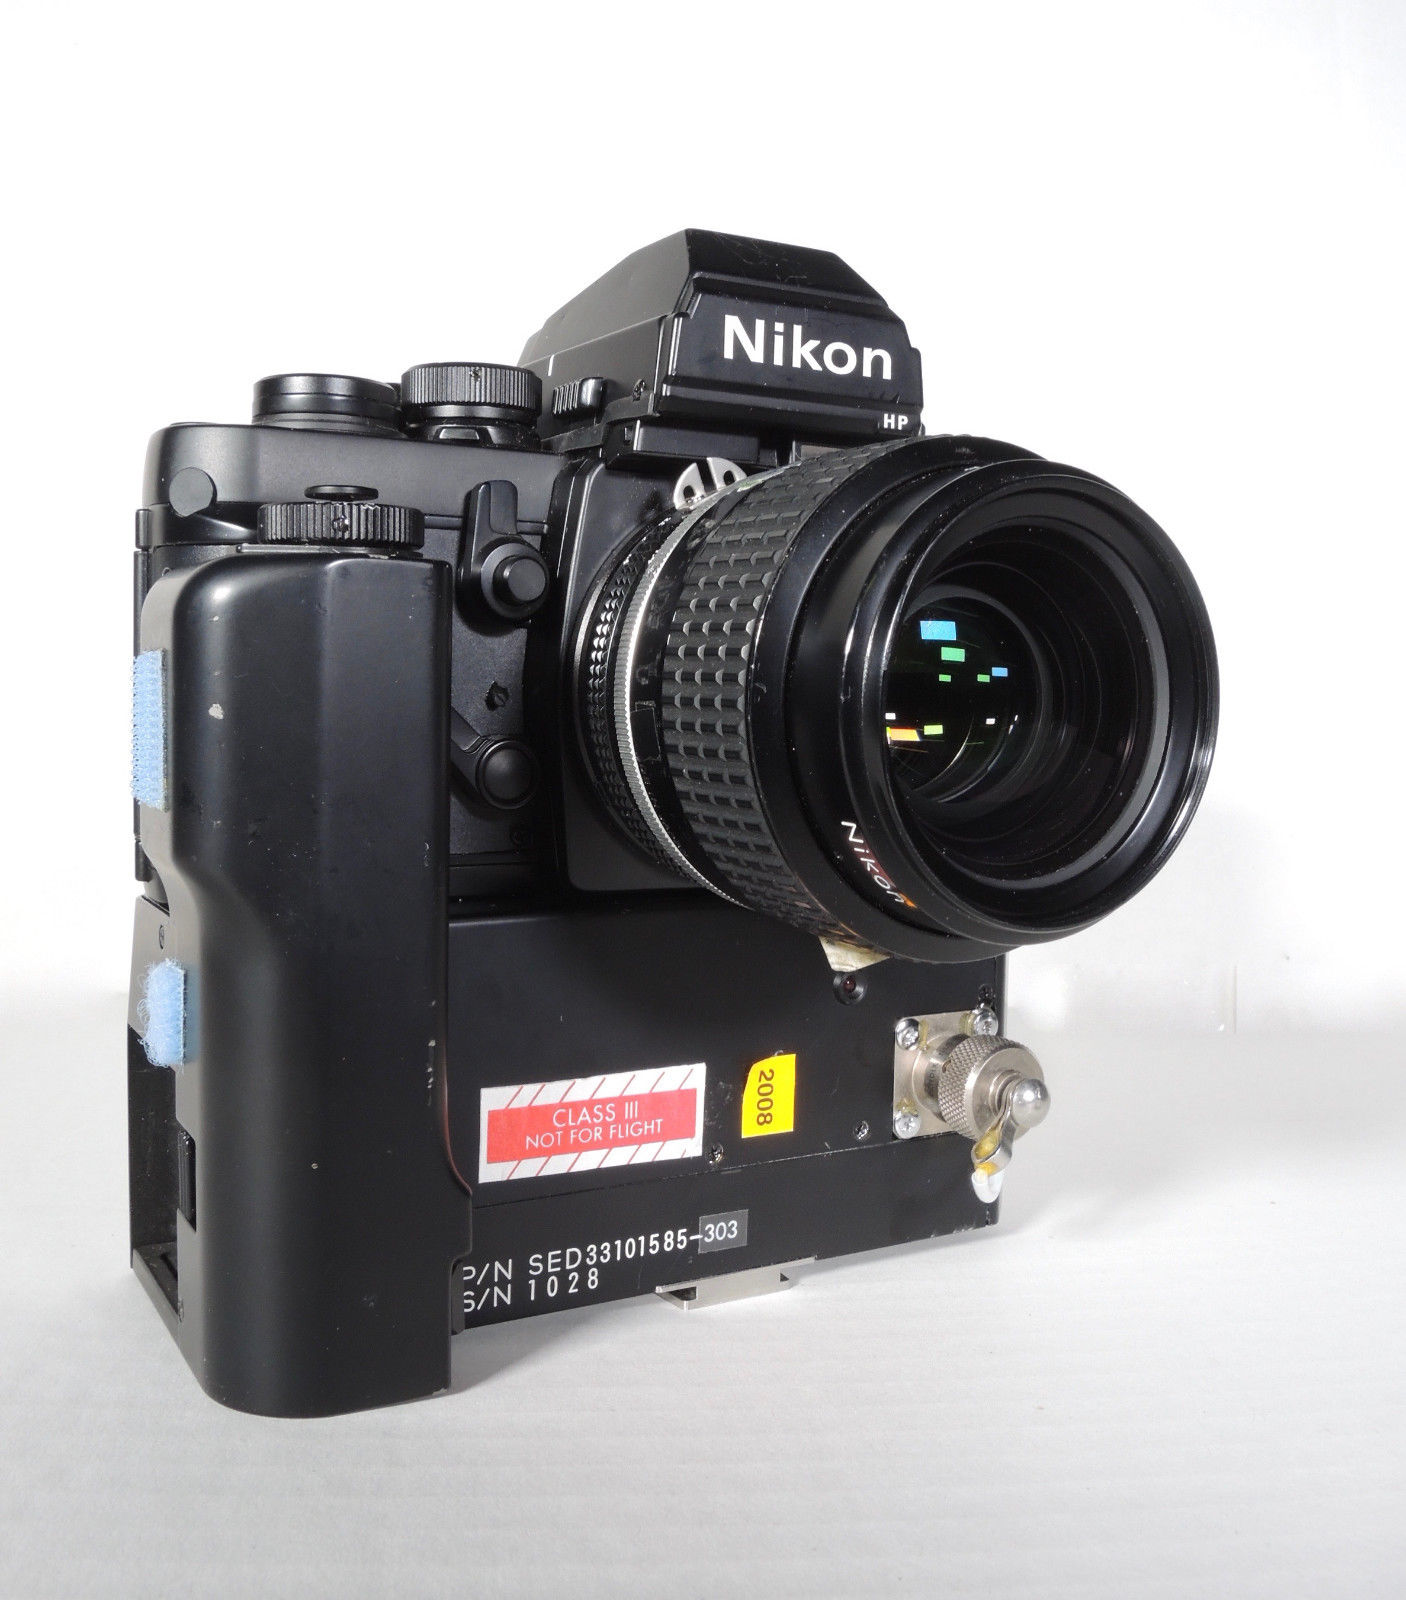 This $24,995 Nikon F3 Camera is One of 50 Cameras Made